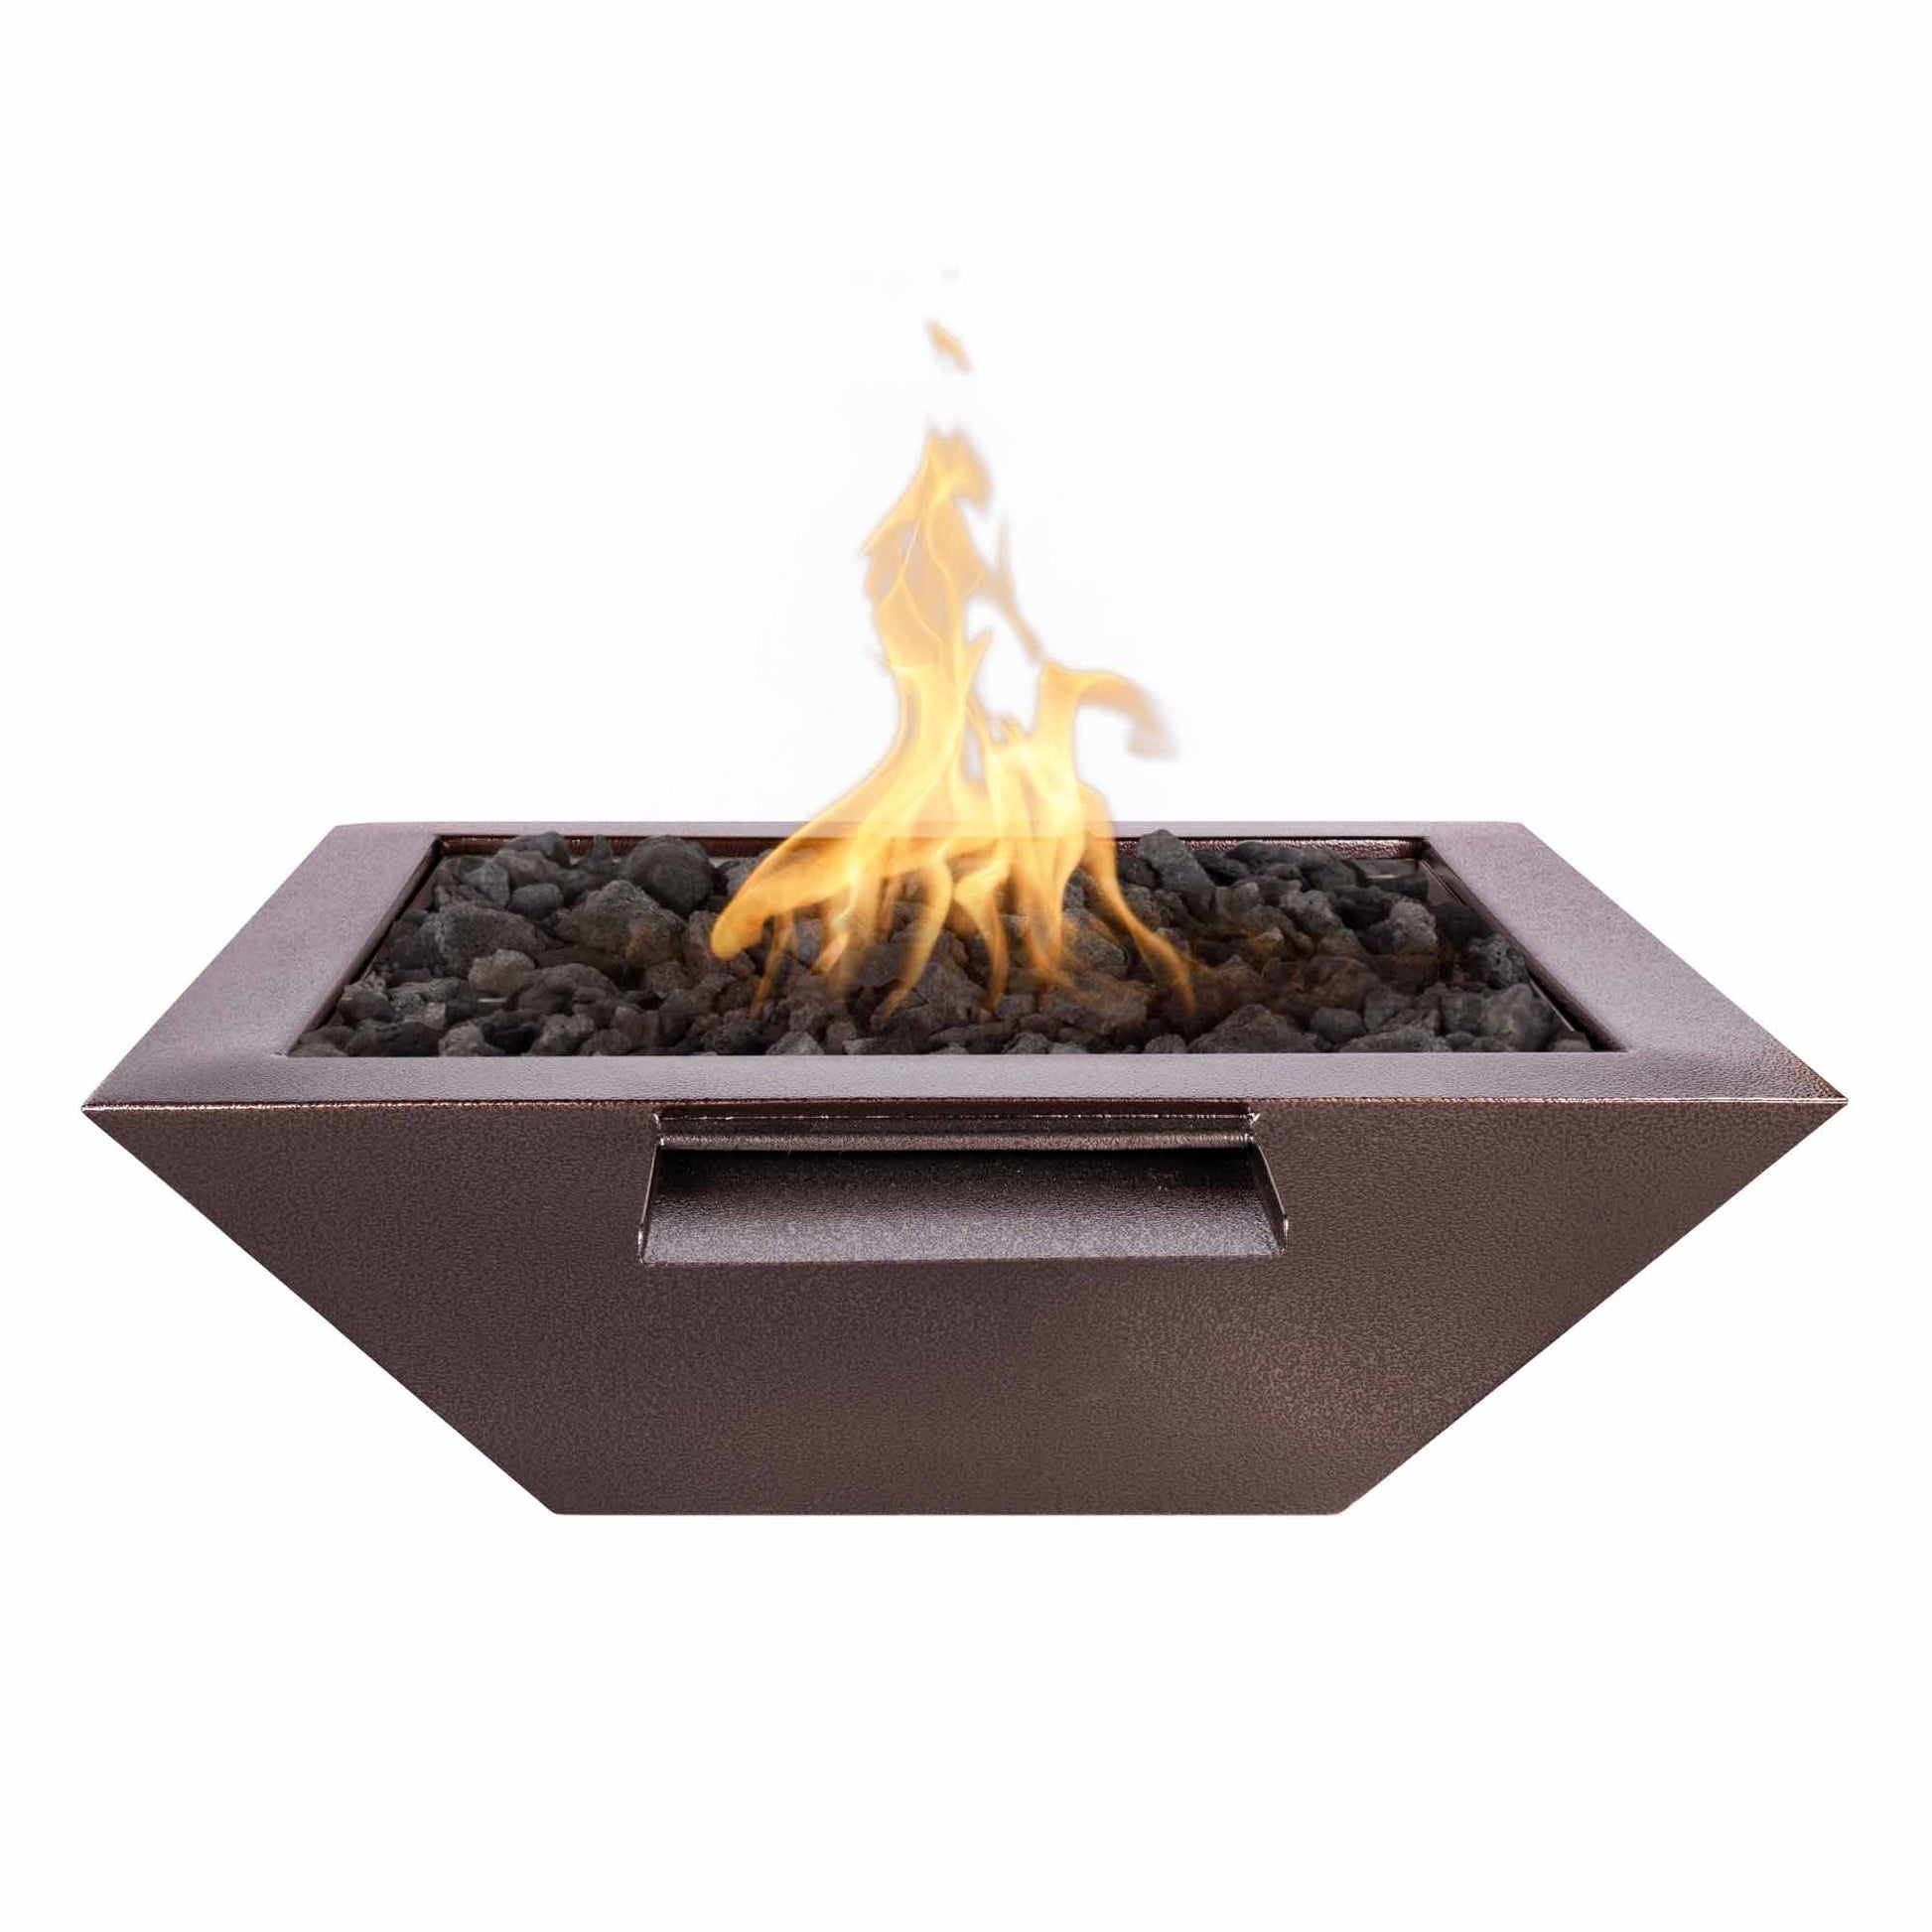 The Outdoor Plus Square Maya 24" Black Powder Coated Metal Natural Gas Fire & Water Bowl with Match Lit with Flame Sense Ignition